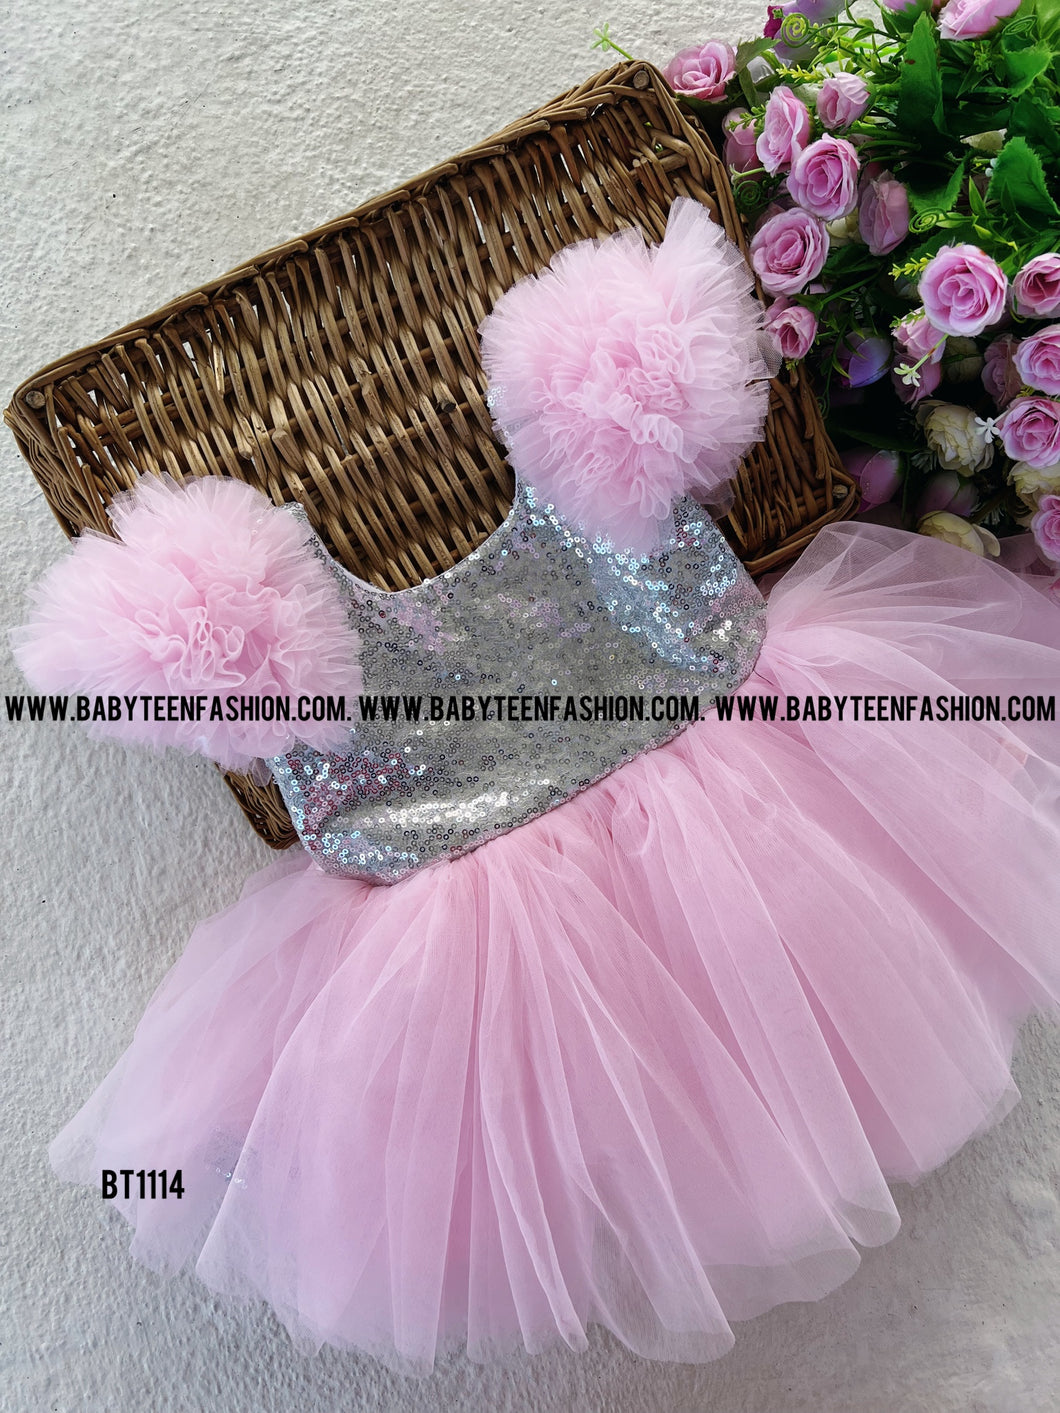 BT1114 Pink Blossom Glitter Gown – A Touch of Sparkle for Your Sweetheart